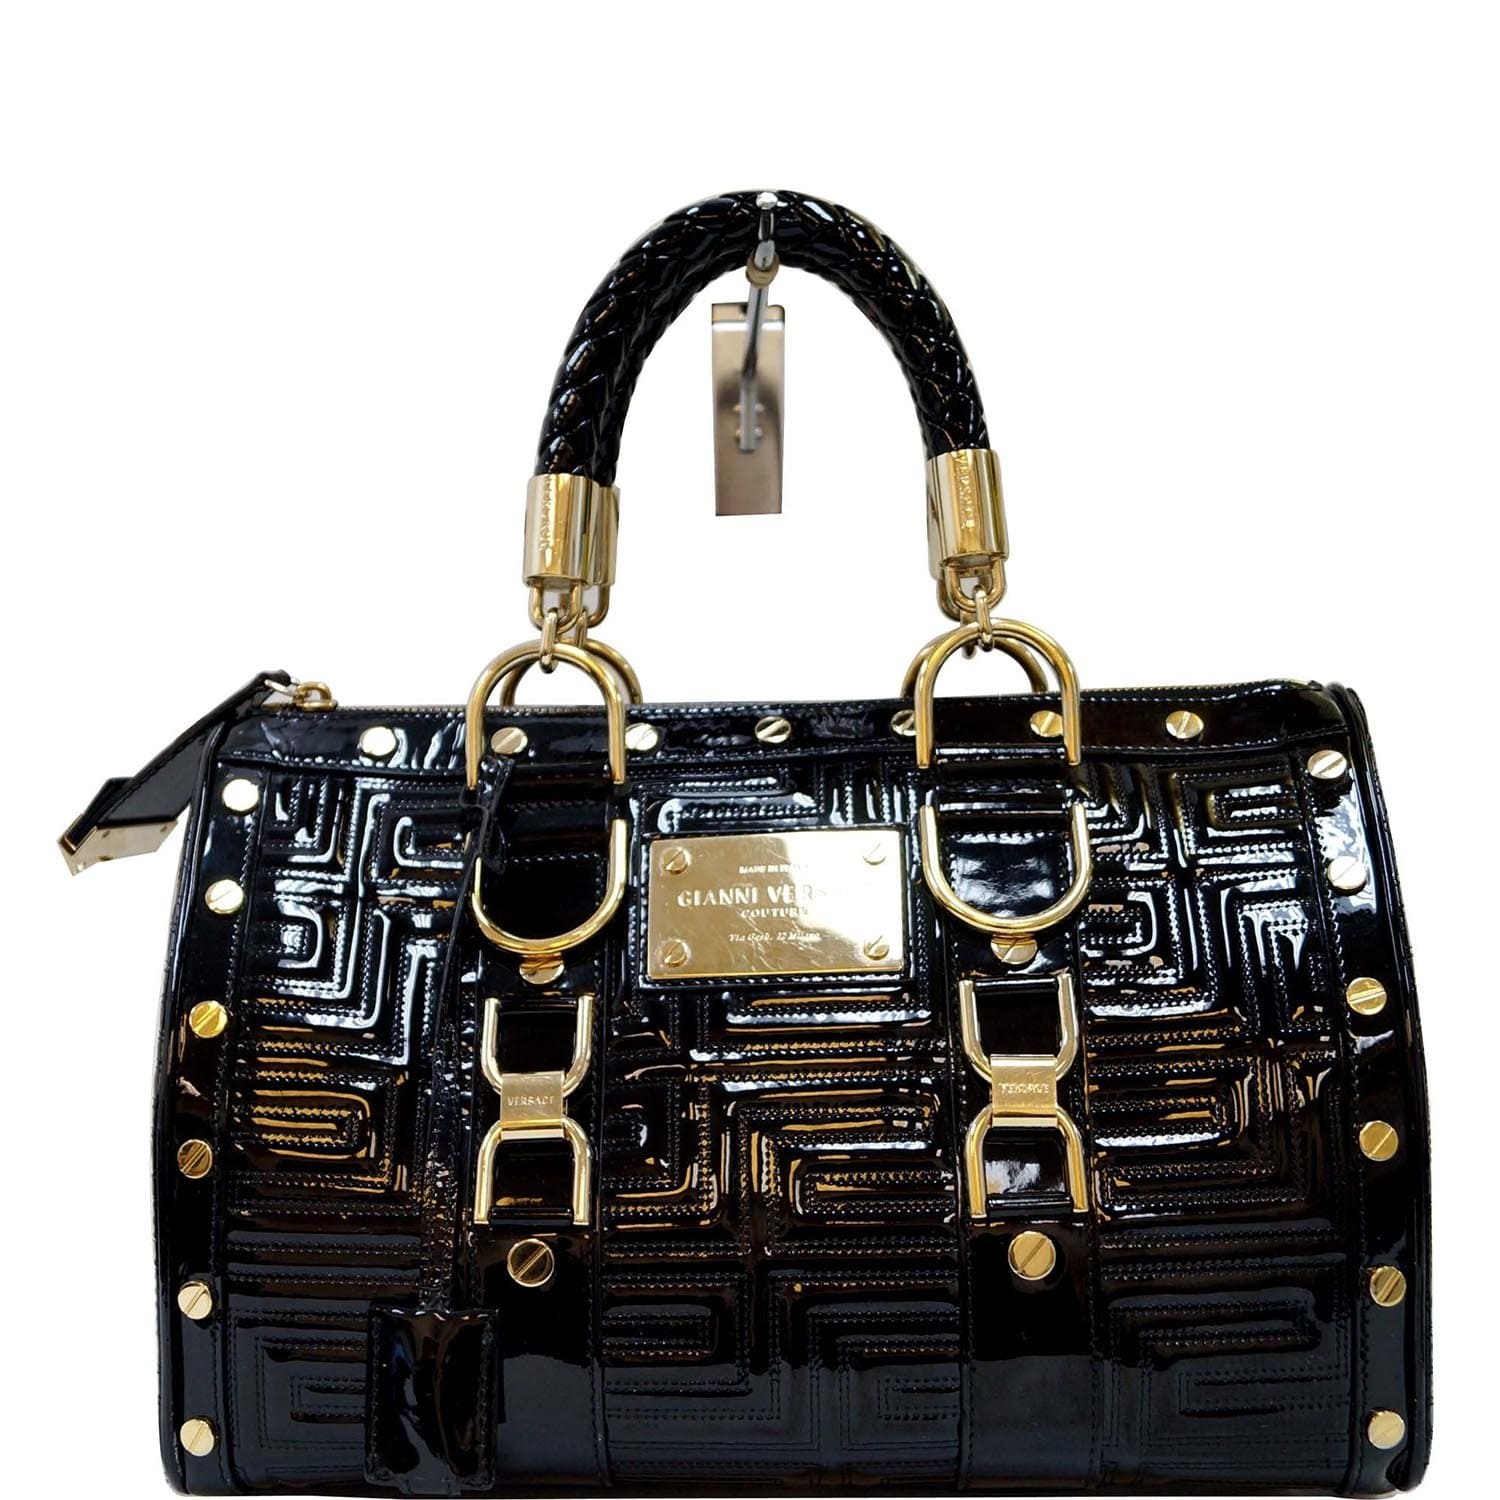 Gianni Versace Couture, Bags, Authentic Versace Bag